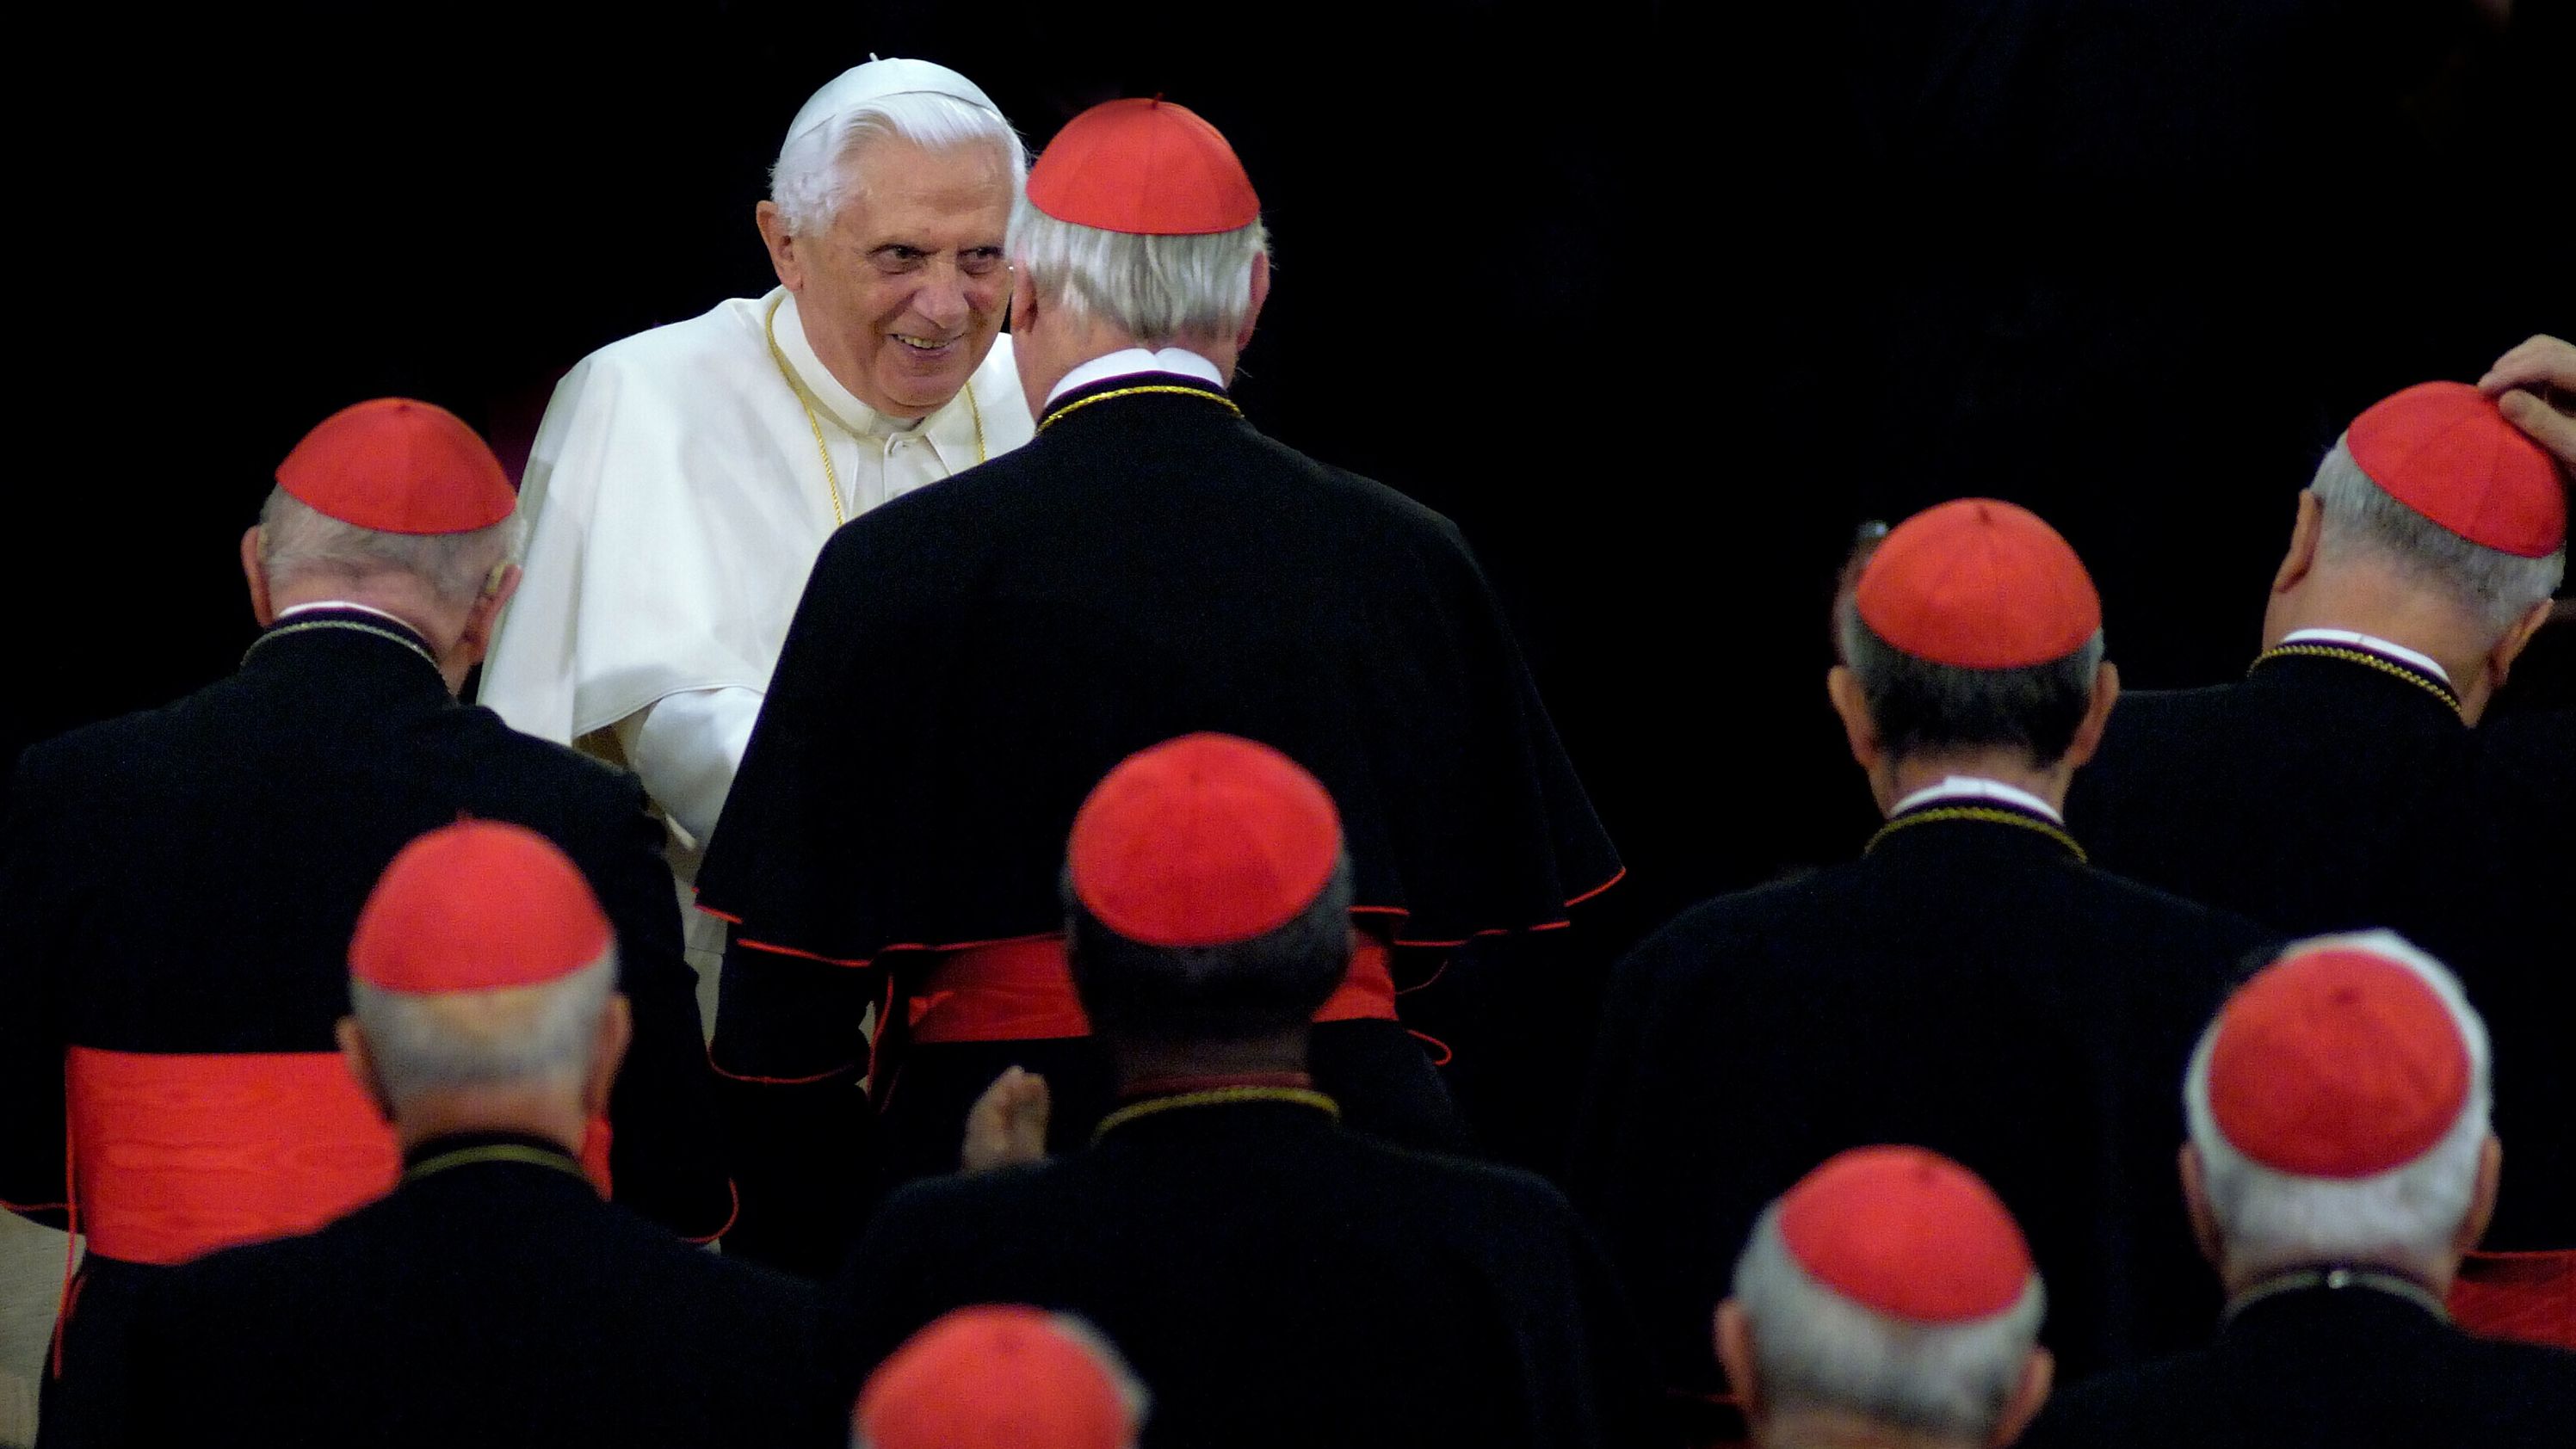 Benedict is greeted by cardinals as he arrives to attend a concert at the Vatican in October 2007.